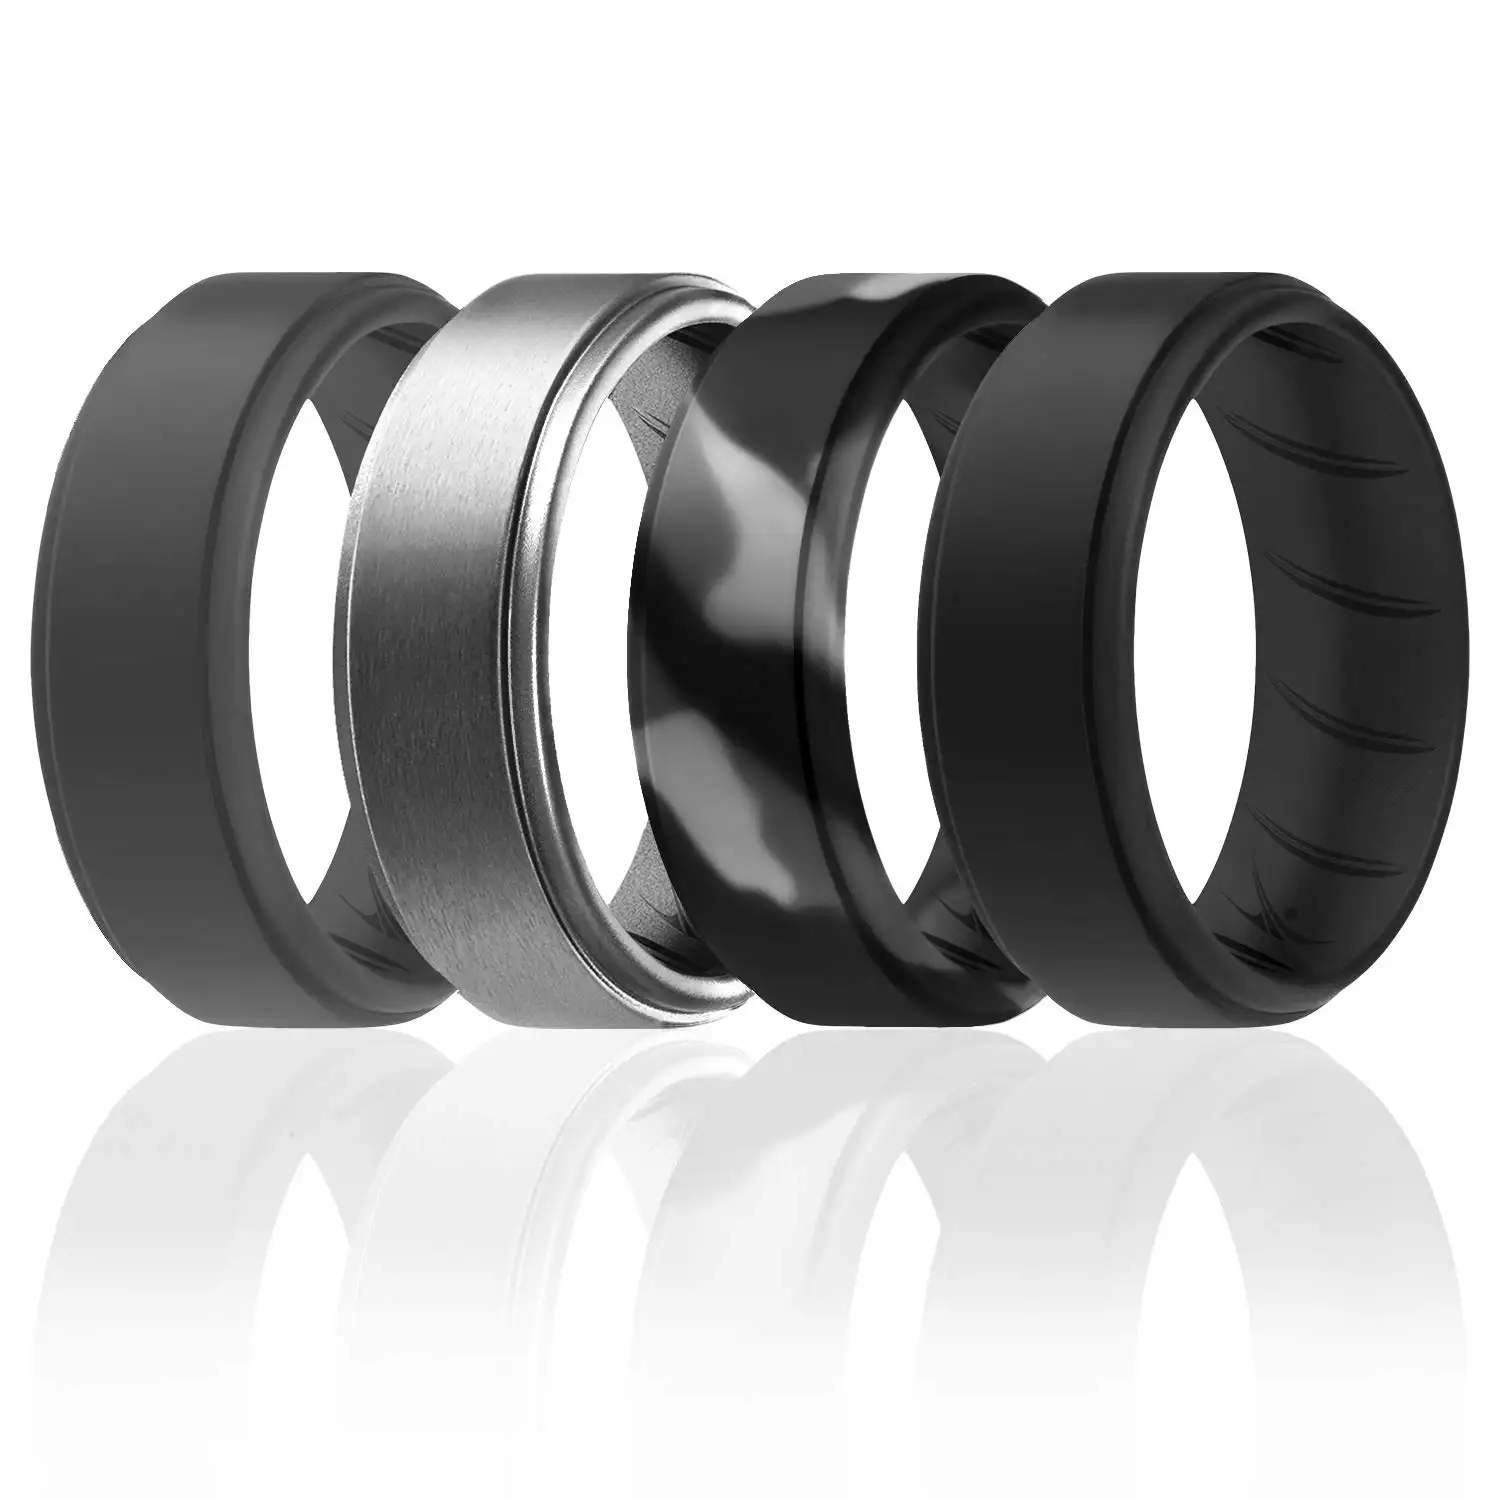 Wholesale Hot Sell Design Innovations Comfortable Mens Rubber silicone o ring band wedding silicone breathable rings